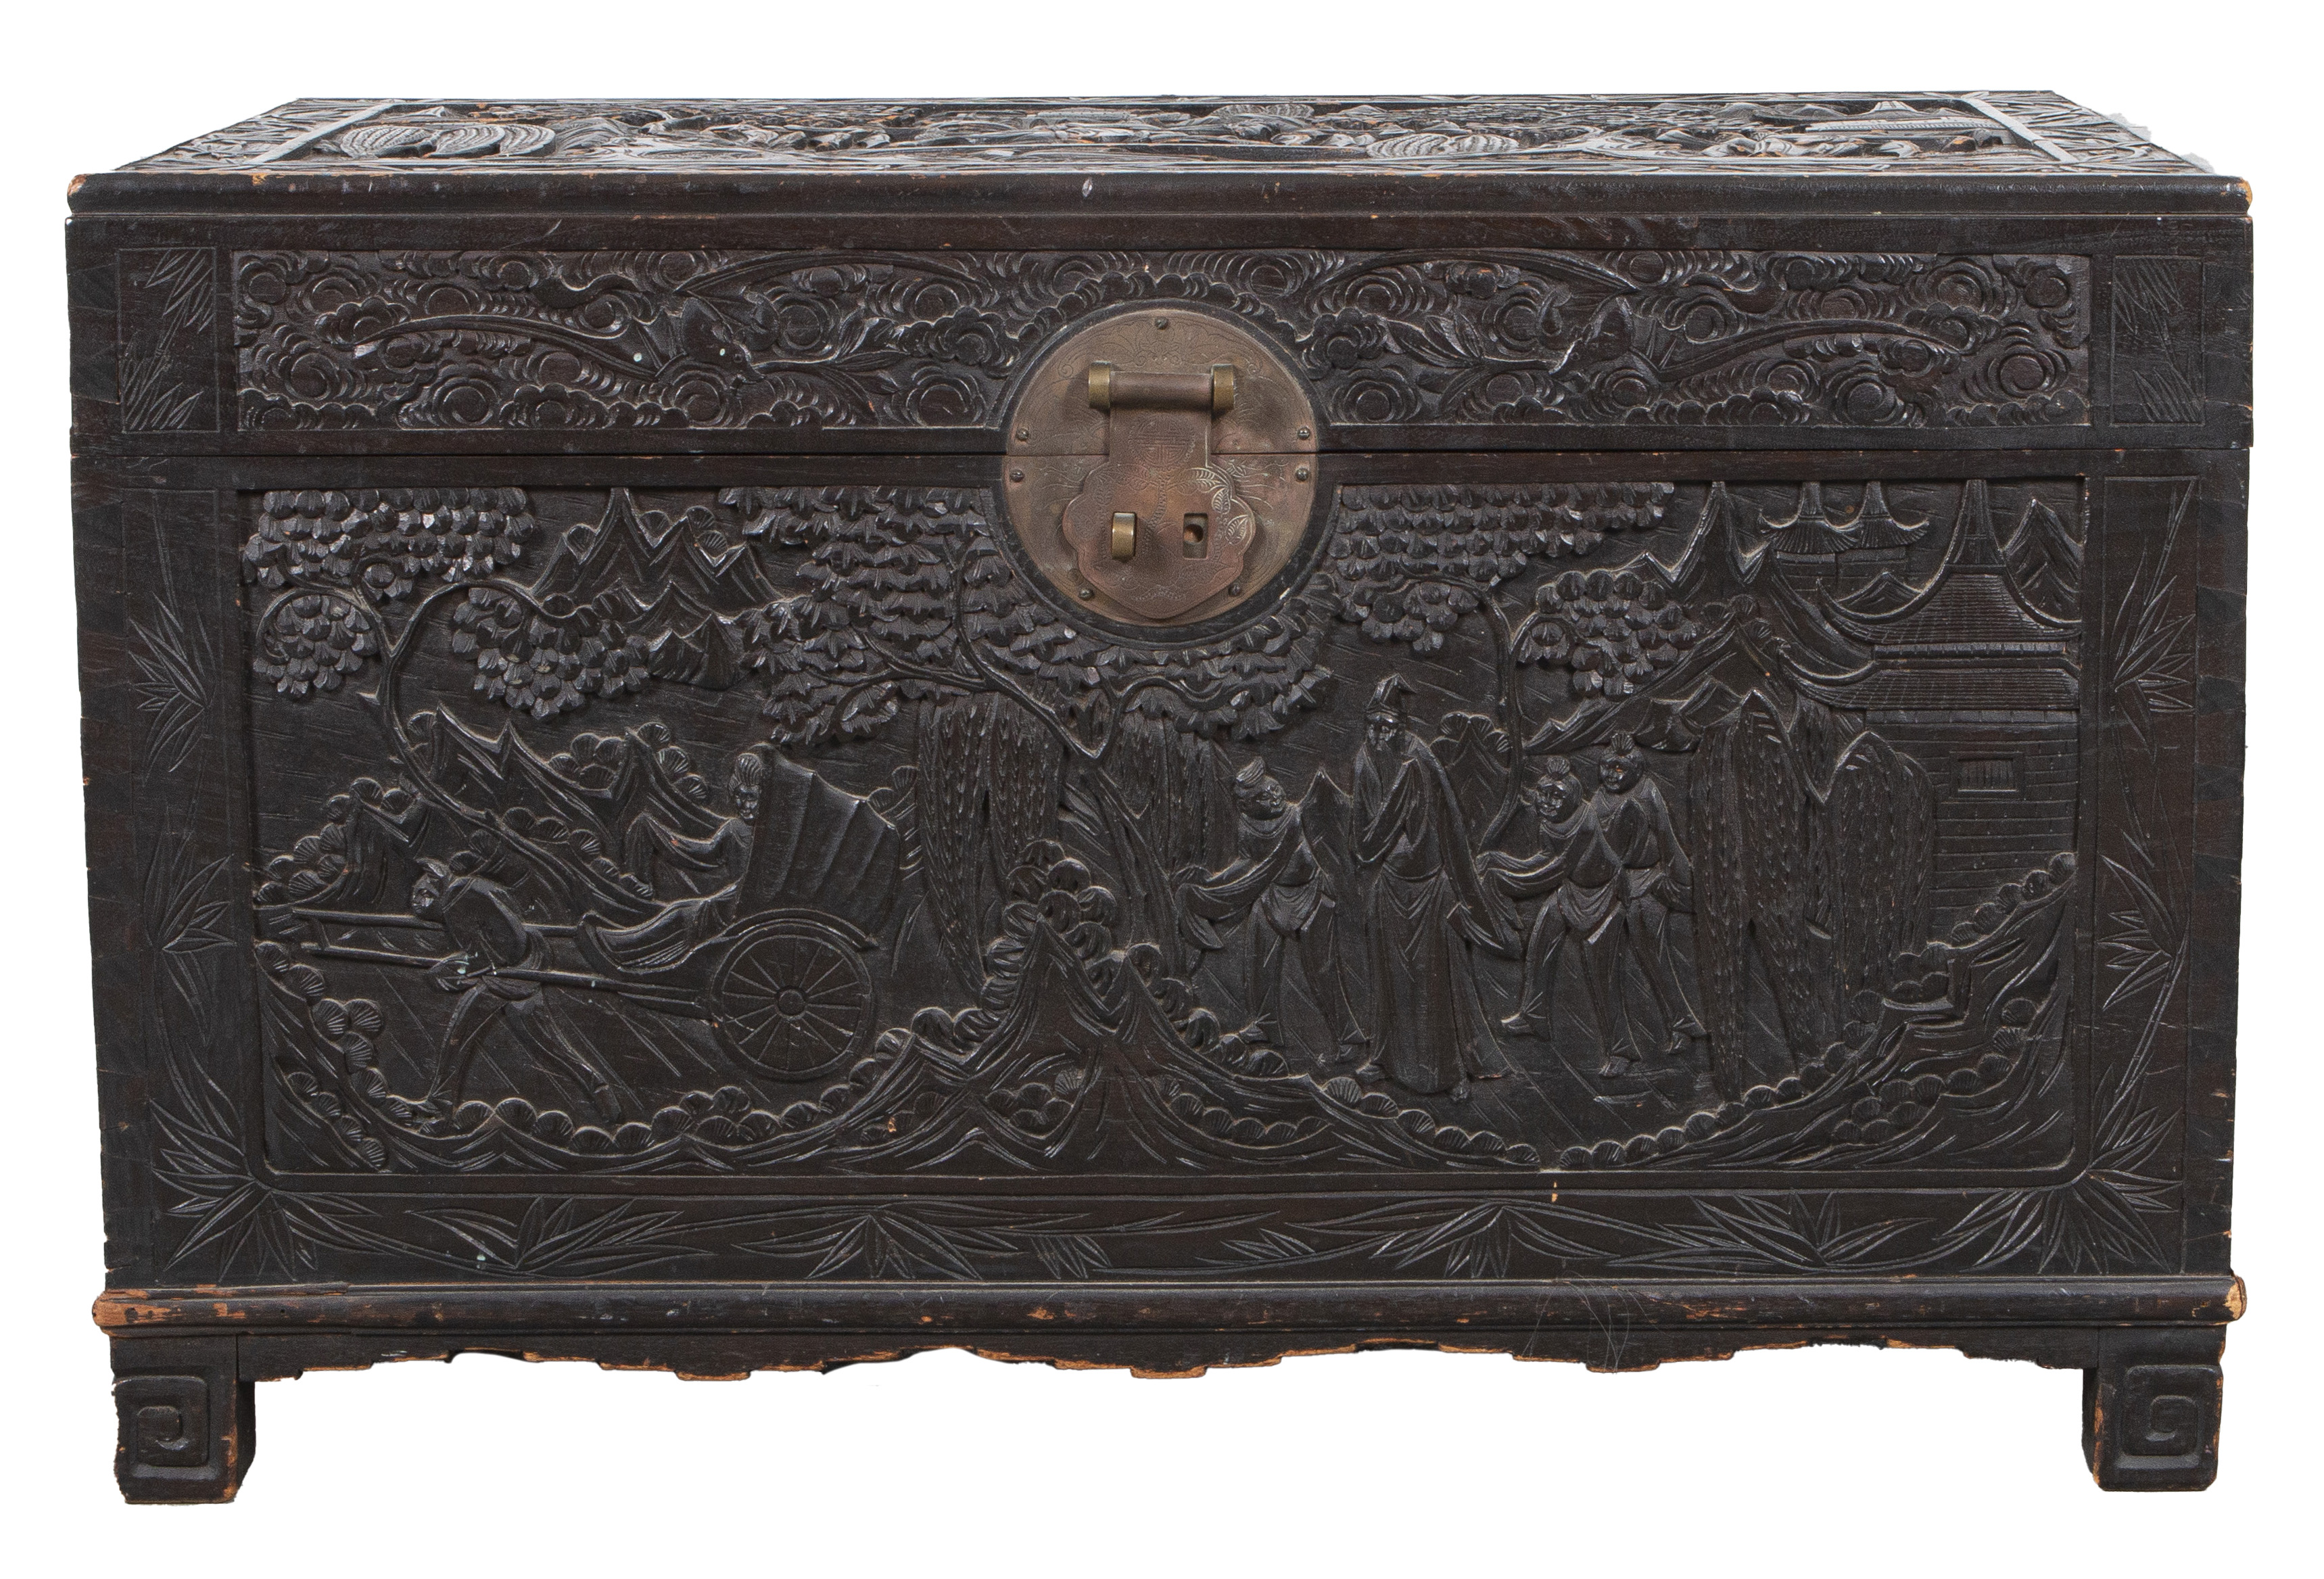 ASIAN CARVED HARDWOOD STORAGE CHEST 3c53ae